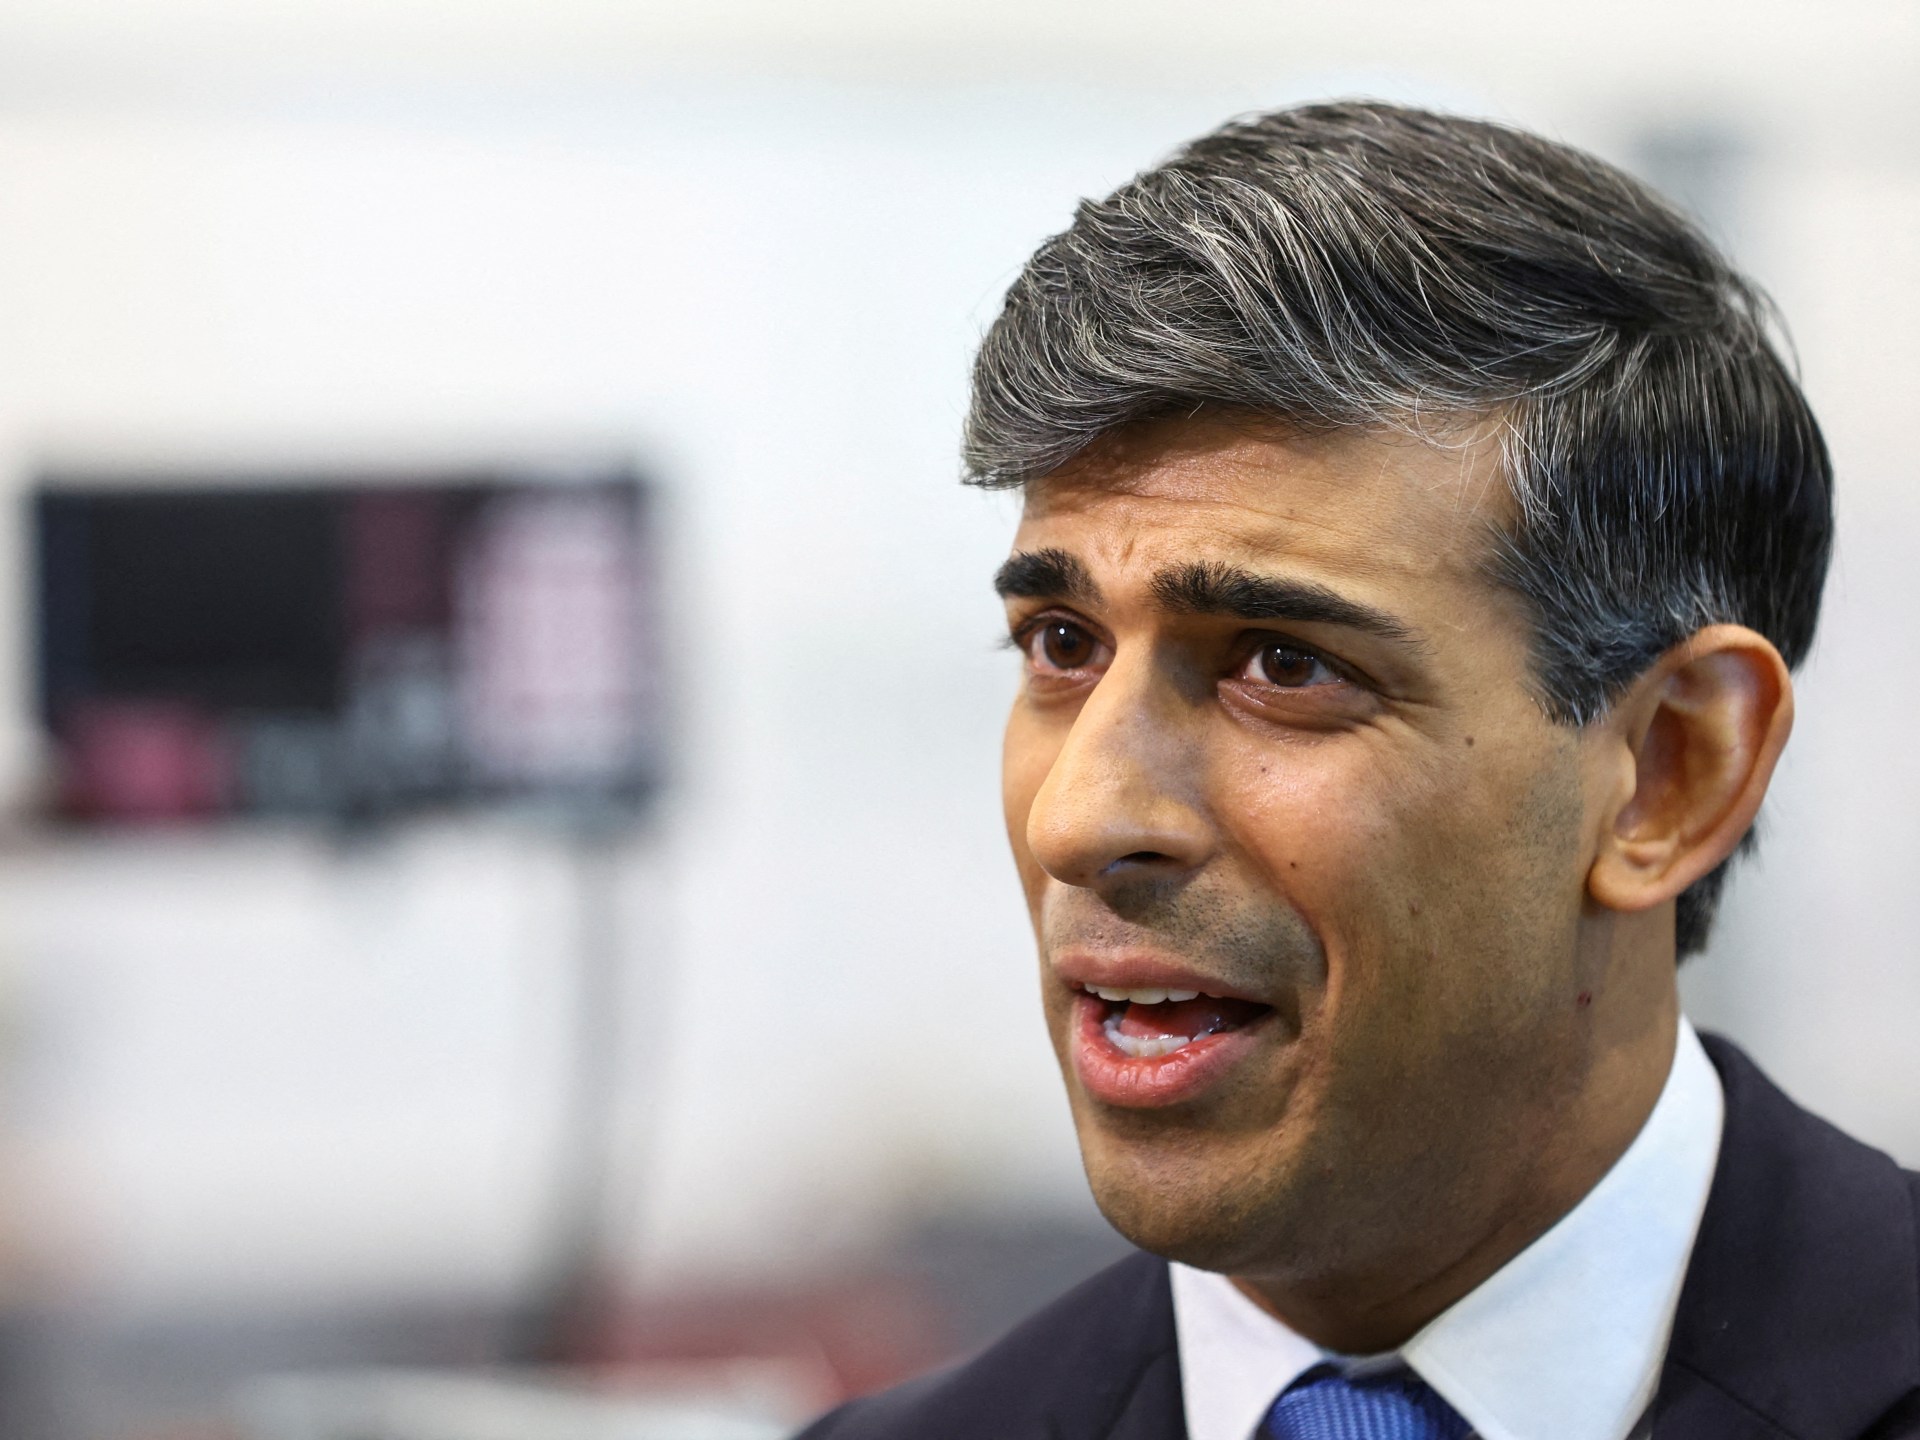 UK’s Rishi Sunak faces growing pressure to stop arms sales to Israel